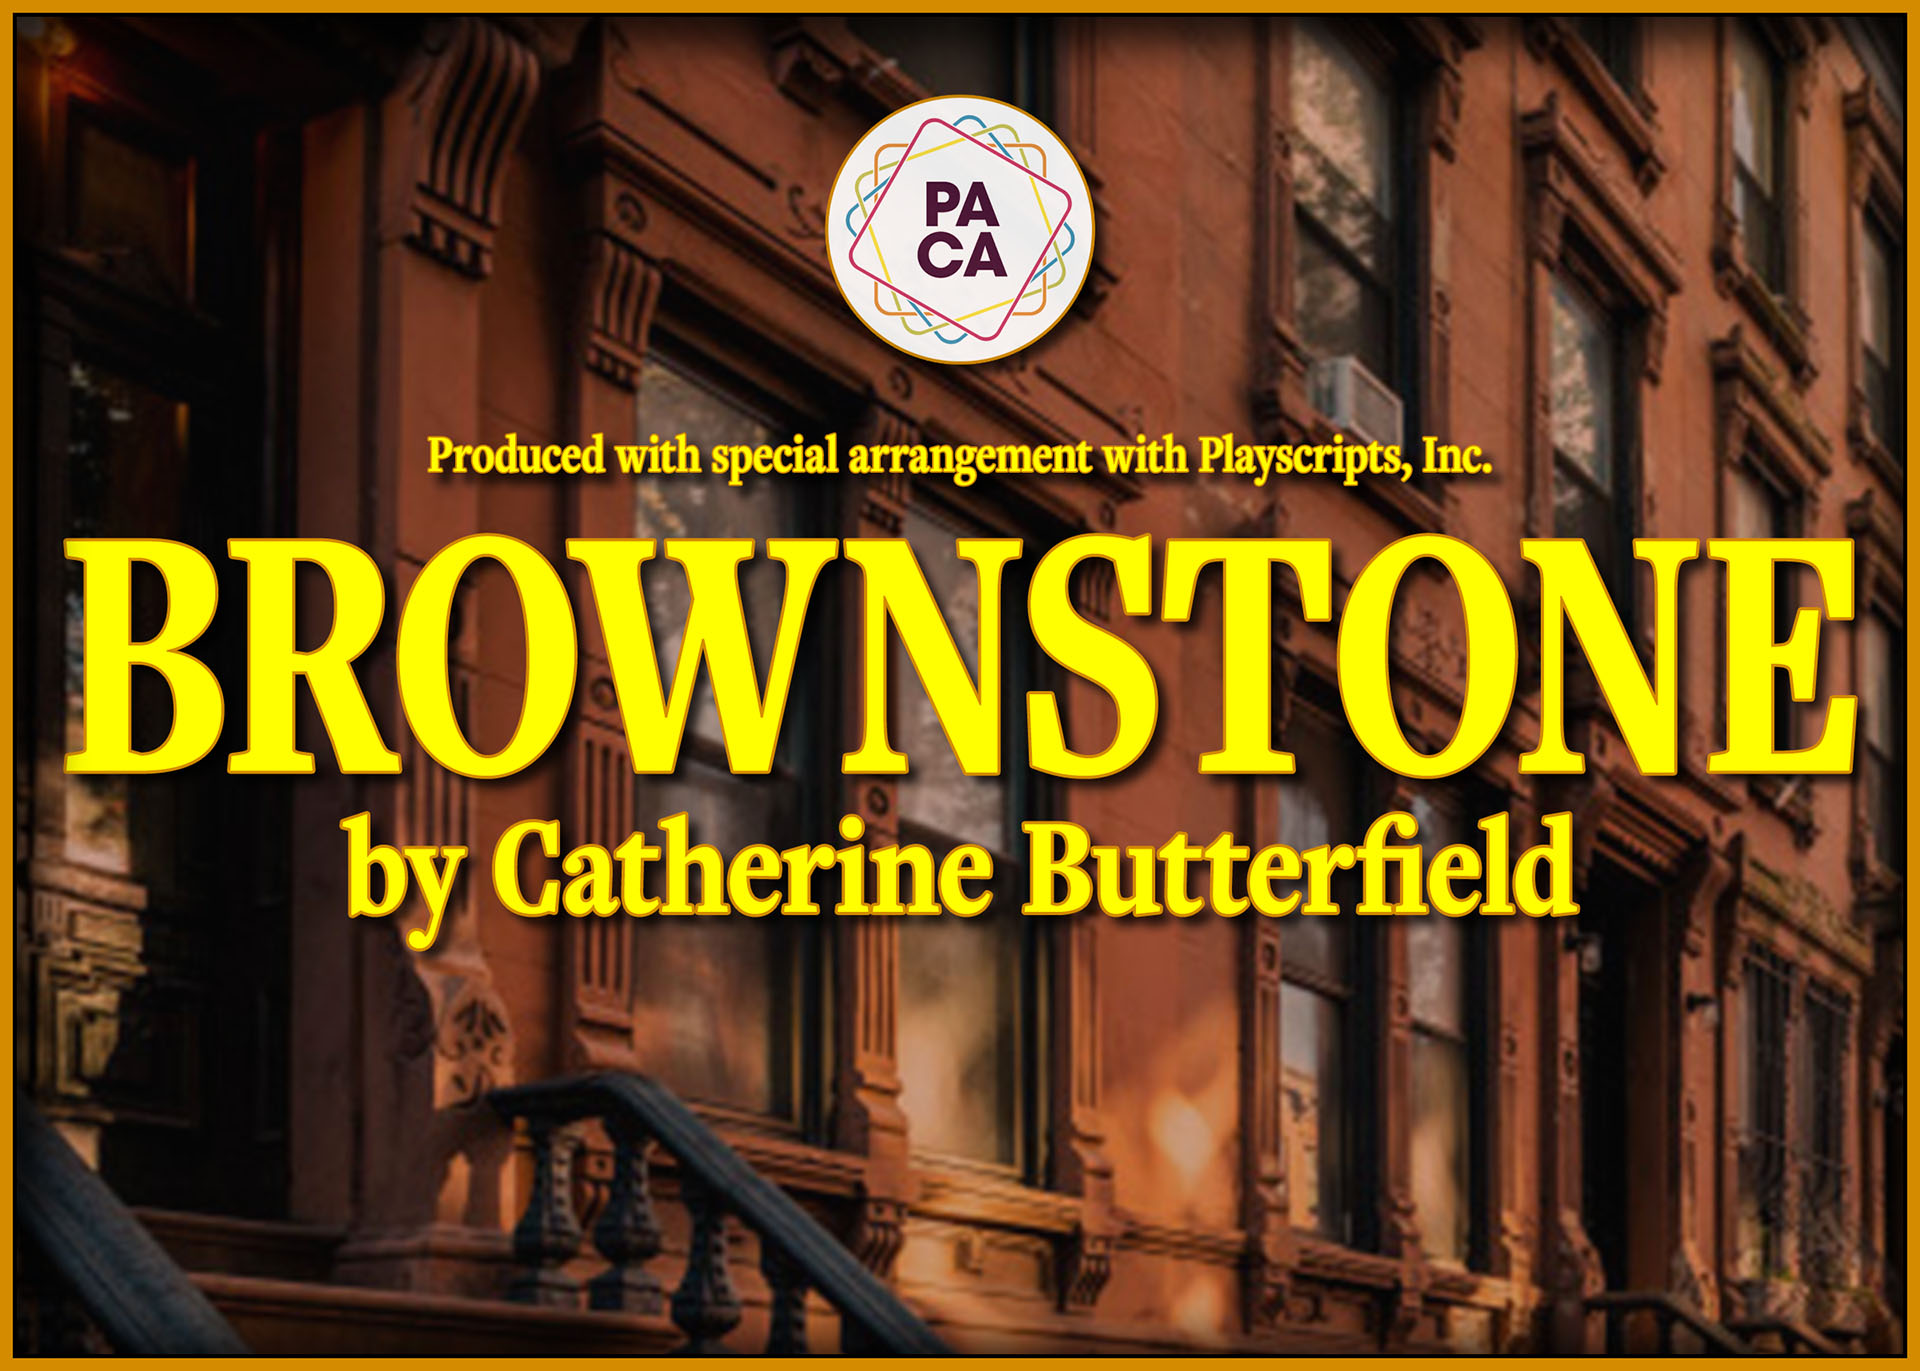 BROWNSTONE by Catherine Butterfield @ PACA